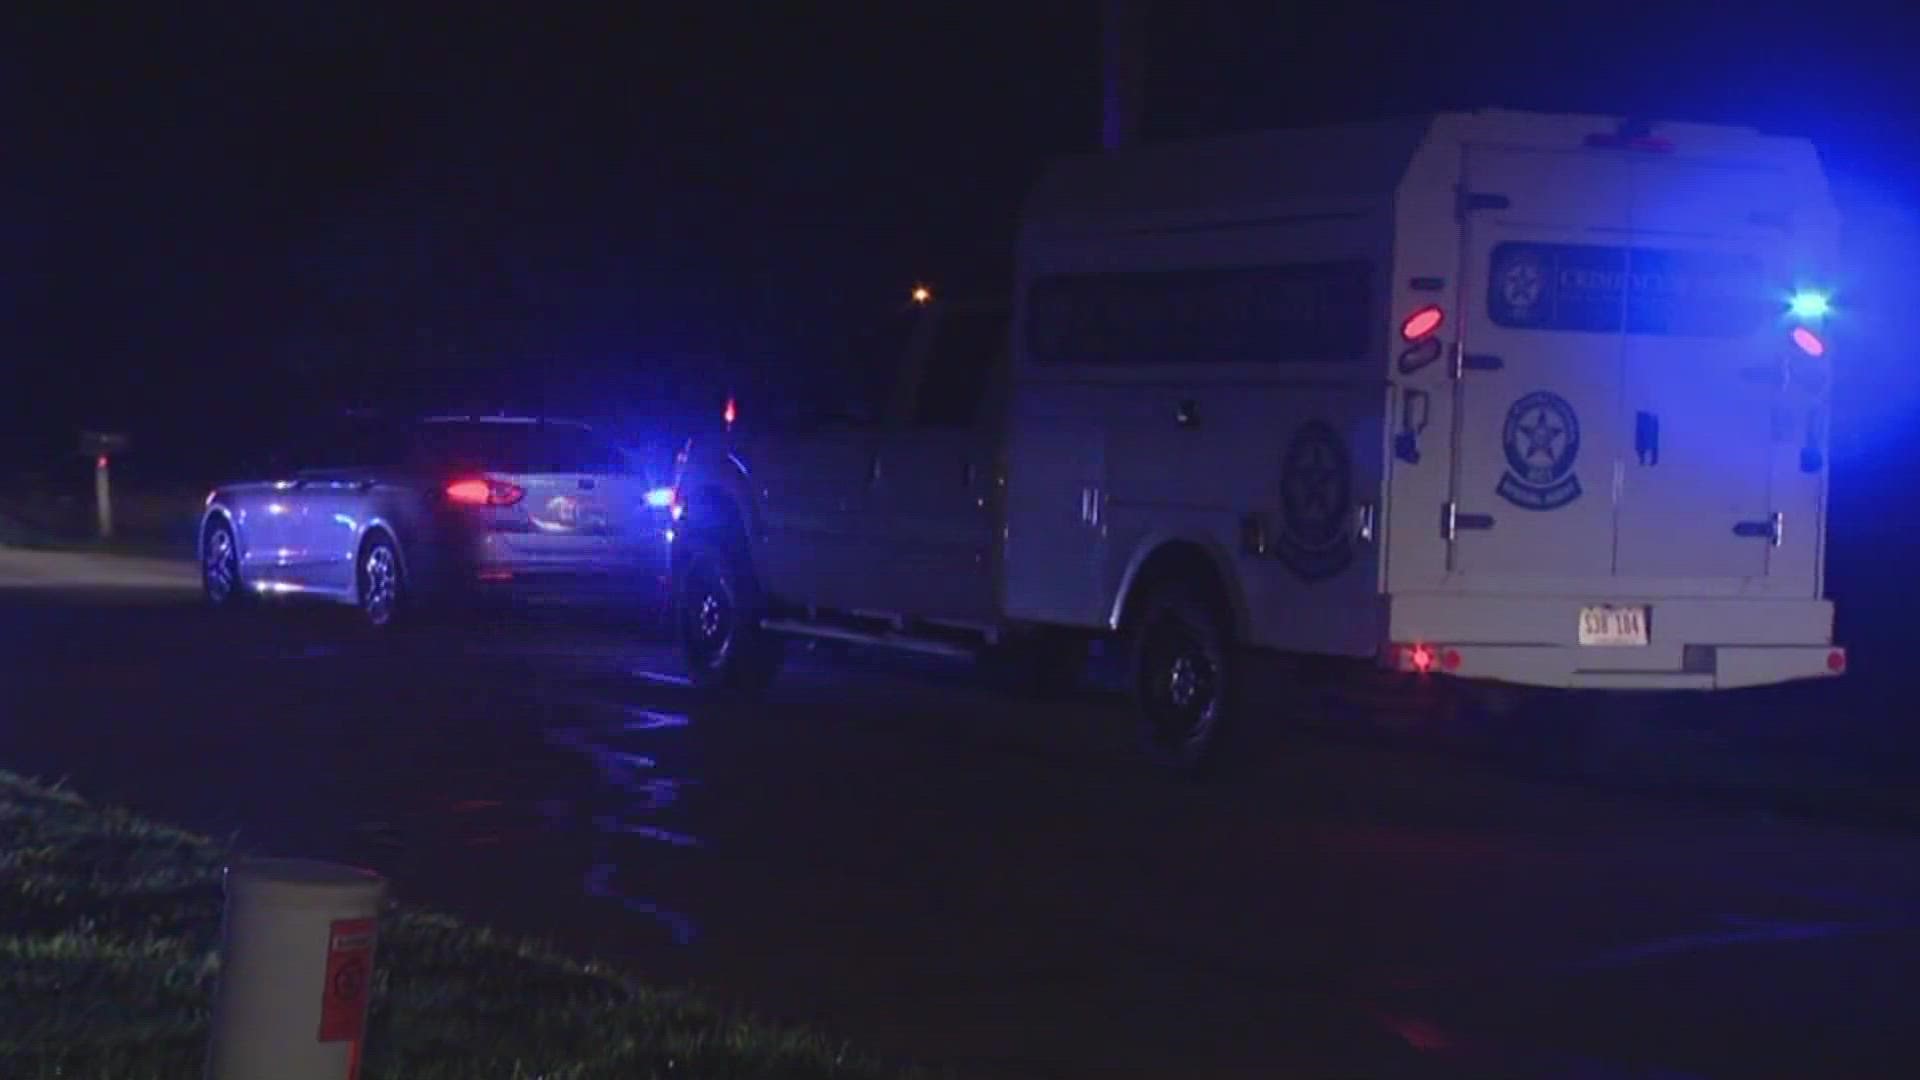 The shooting happened at a home on the 10000 block of Thrailkill Road just before 11:40 p.m., according to Pickaway County Sheriff Matthew Hafey.